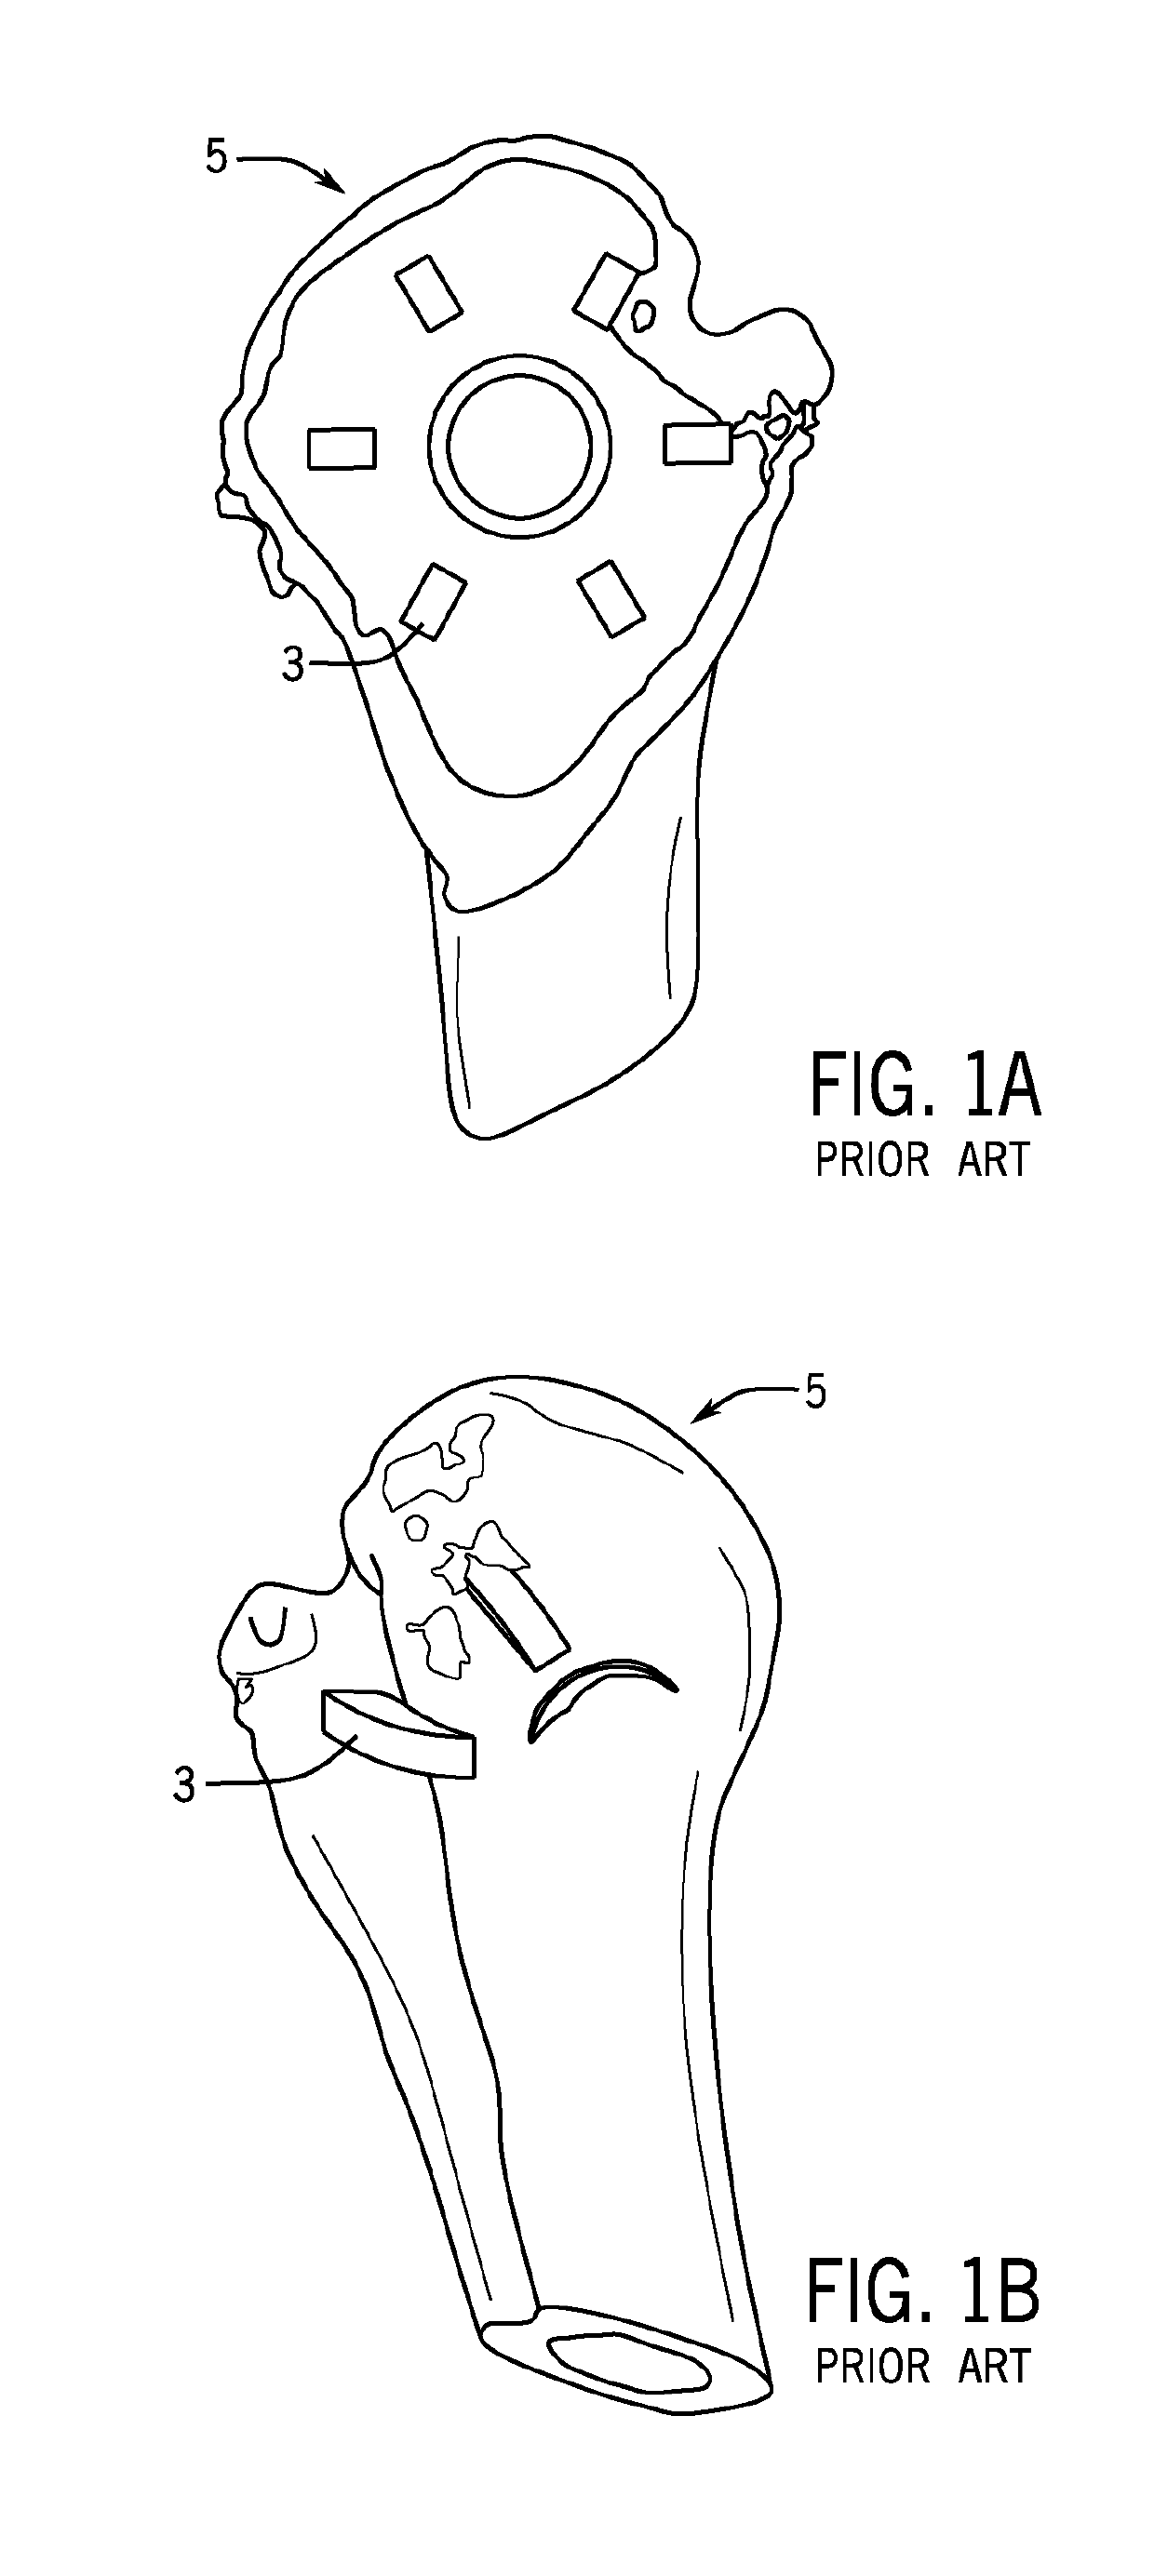 Method for Modeling Humeral Anatomy and Optimization of Component Design